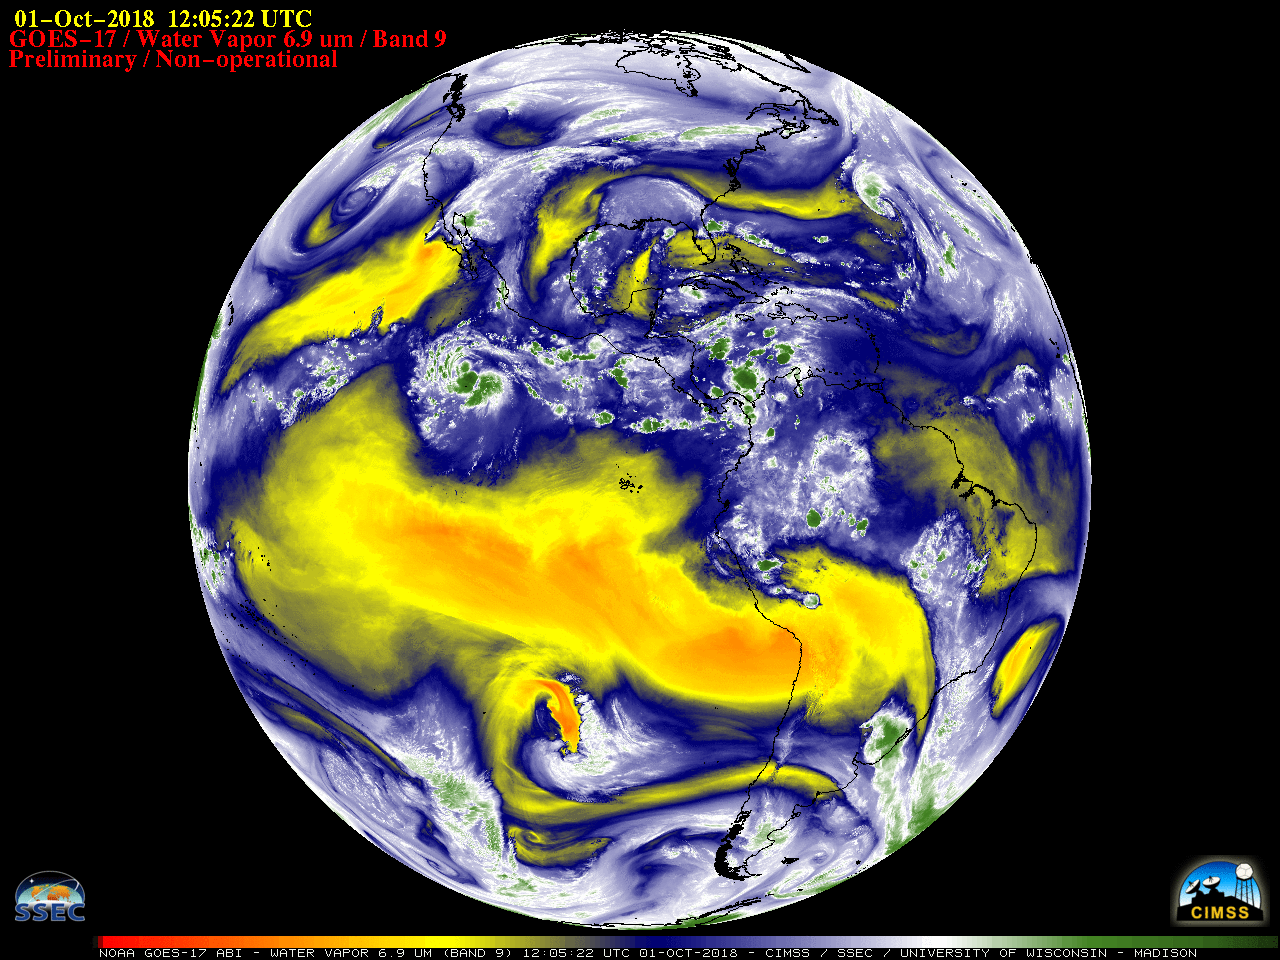 GOES-17 Mid-level Water Vapor (6.9 µm) images [click to play MP4 animation]